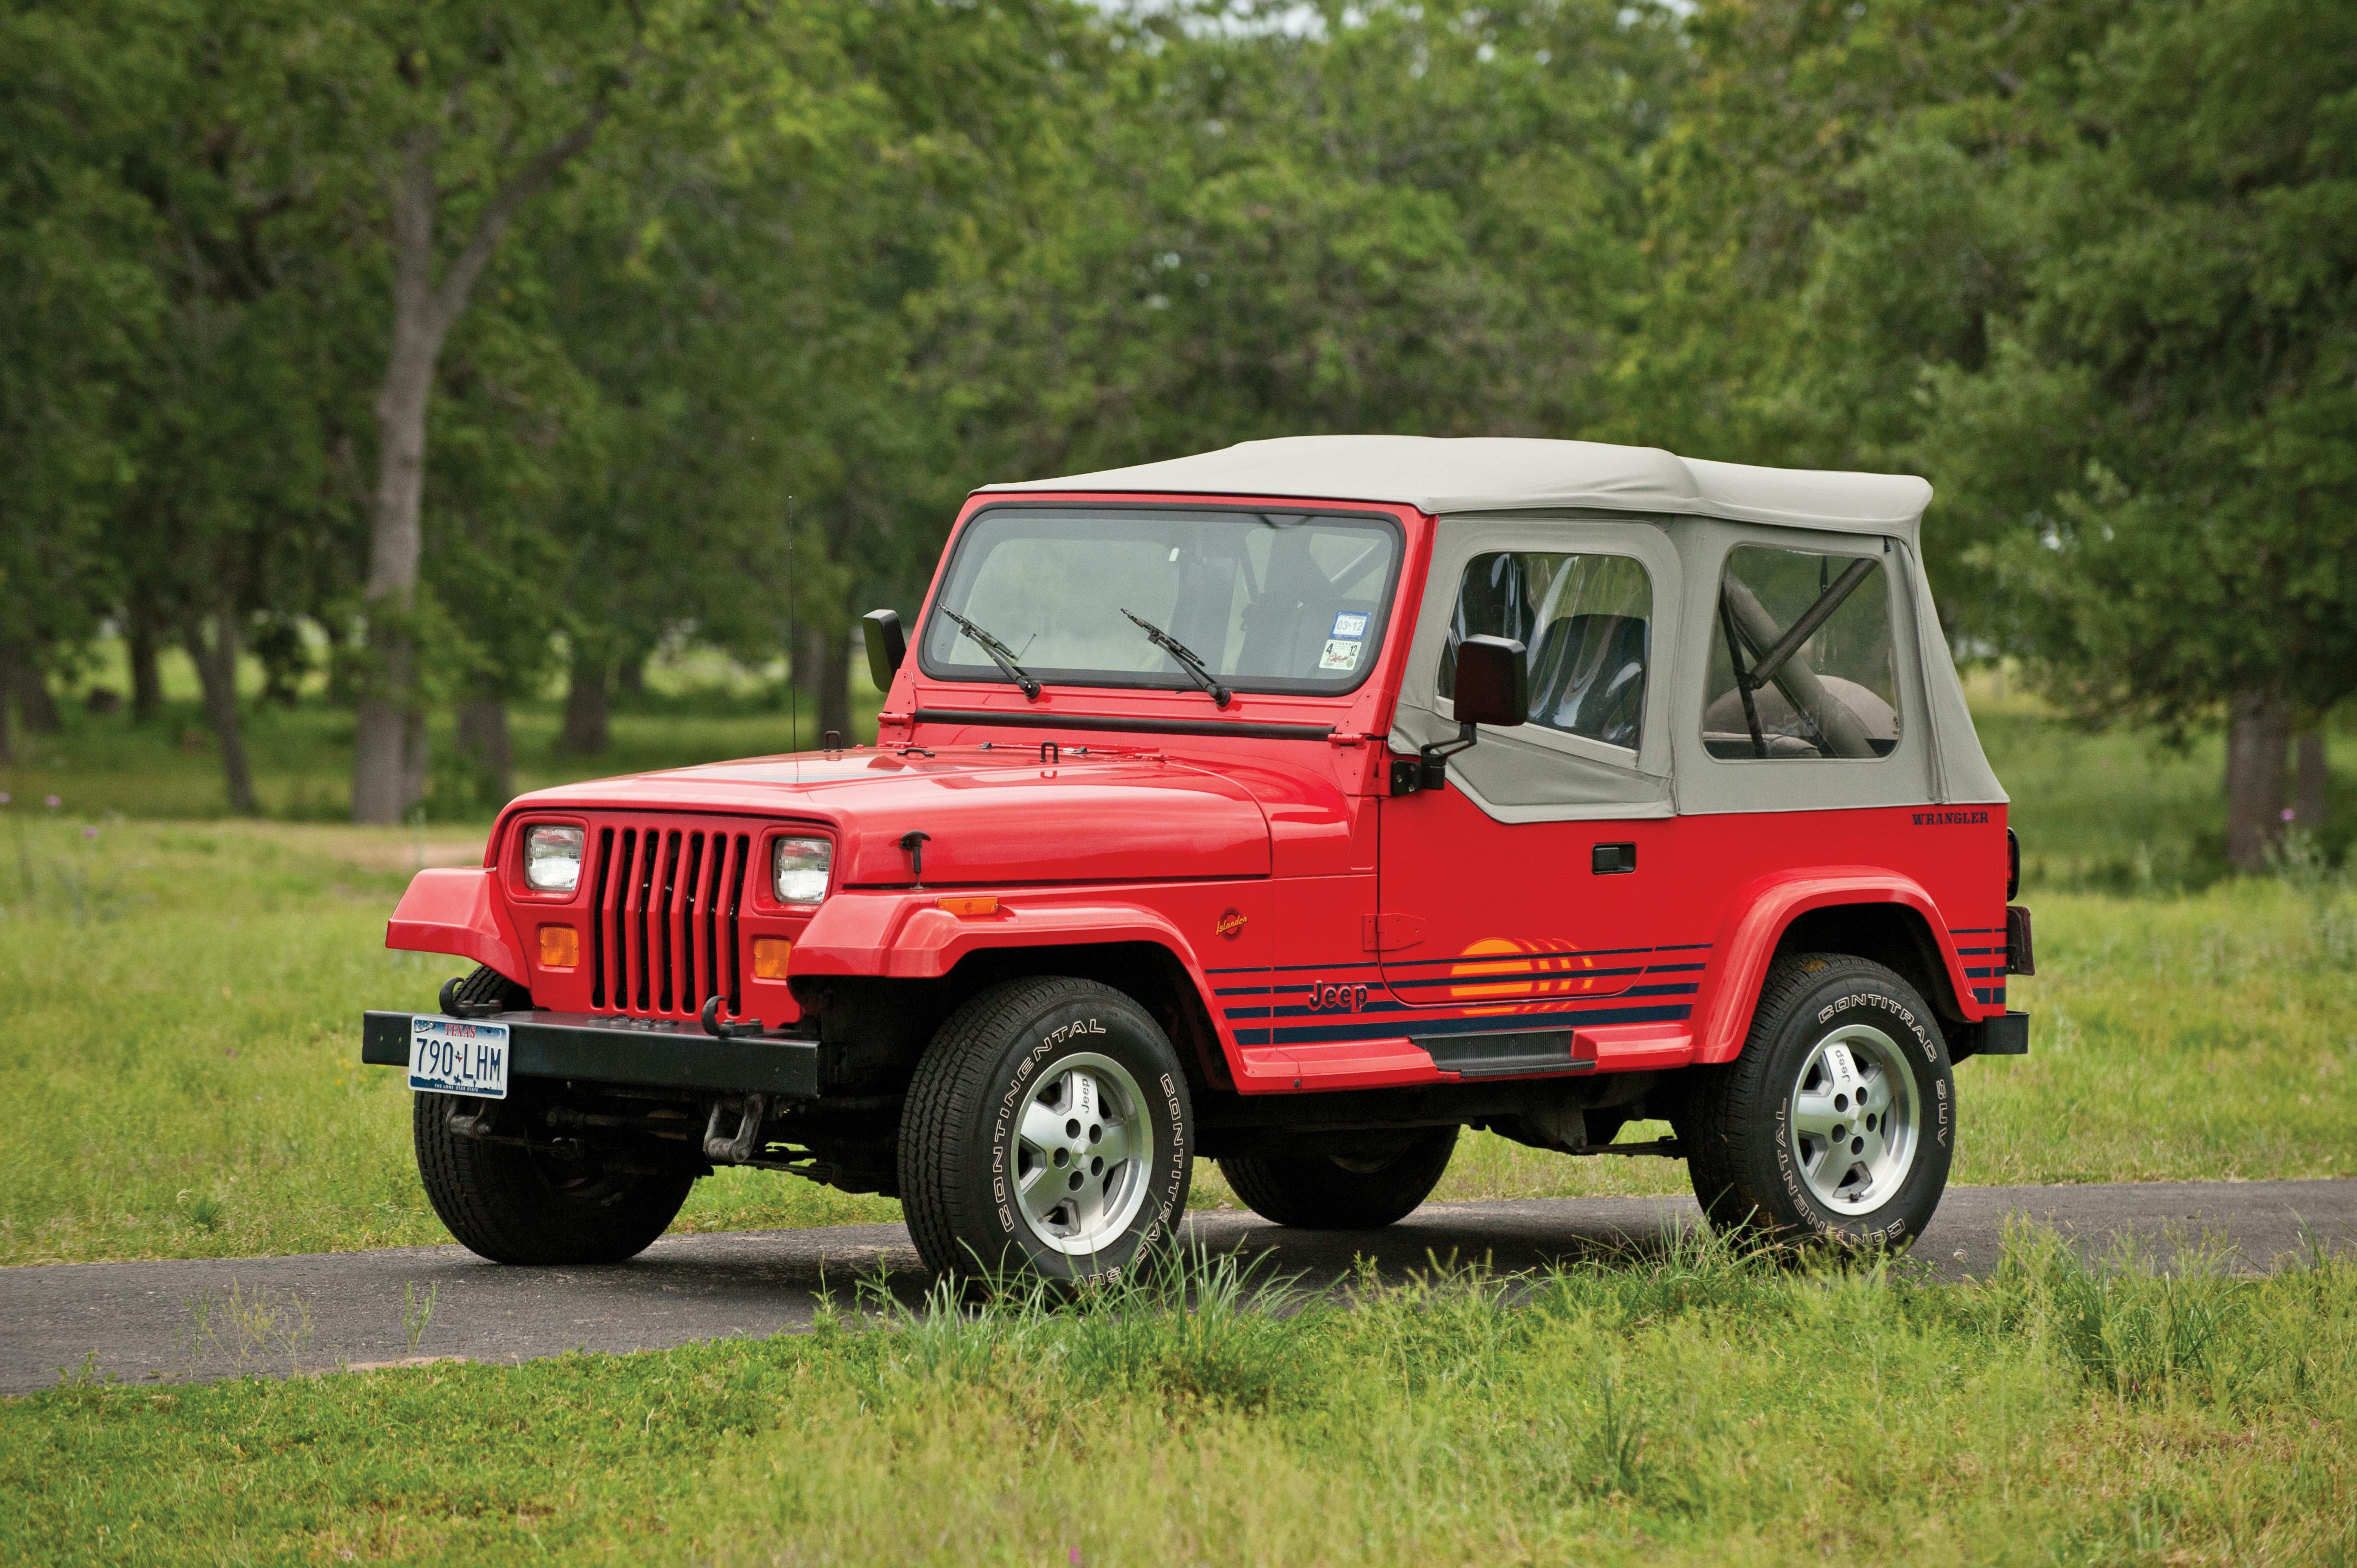 1987 Jeep Wrangler Base | Hagerty Valuation Tools